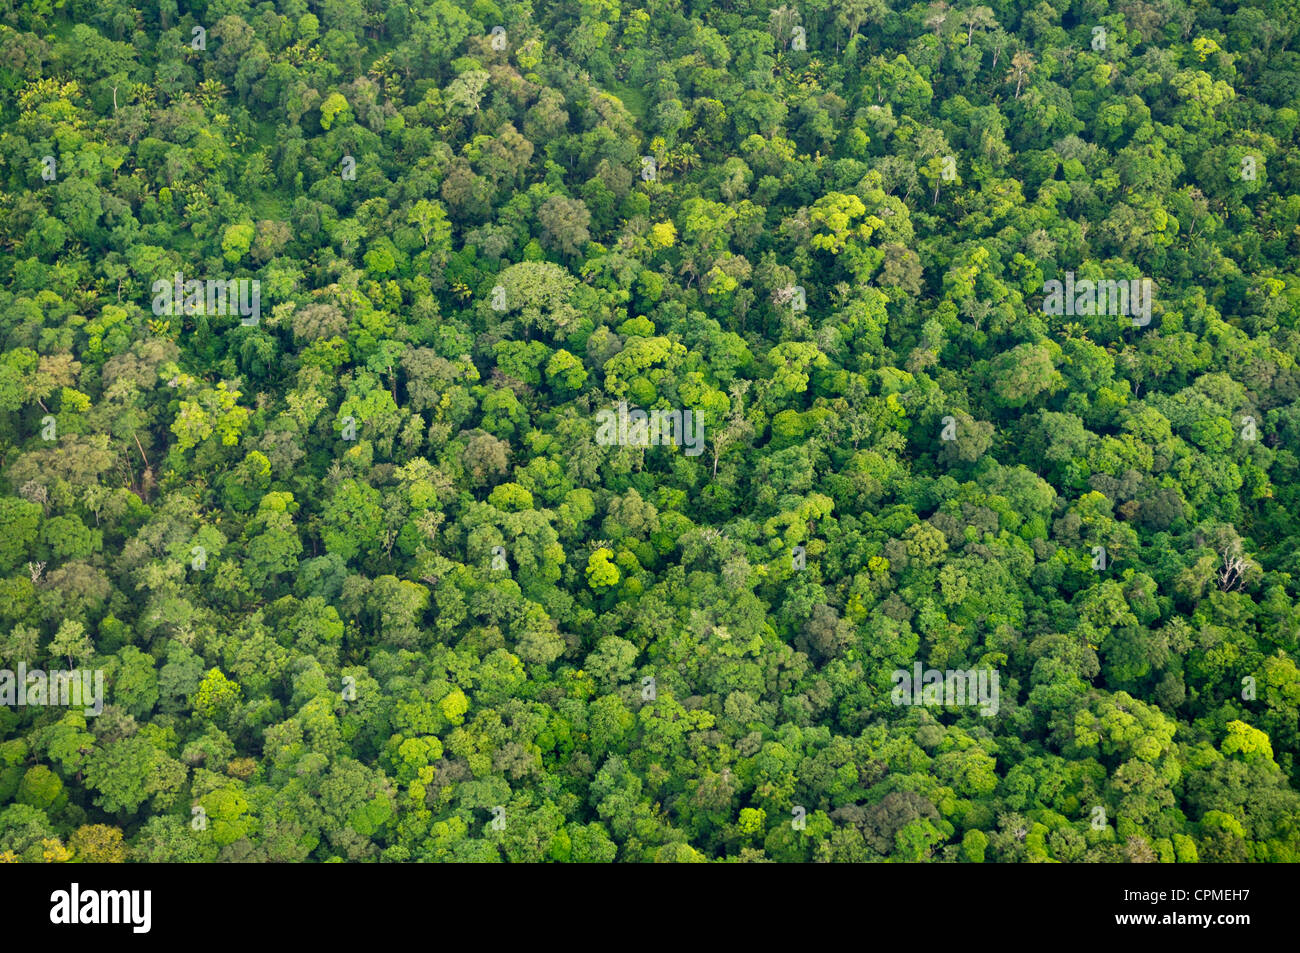 Tropical rainforest canopy from the air, Tortuguero National Park, Costa Rica Stock Photo